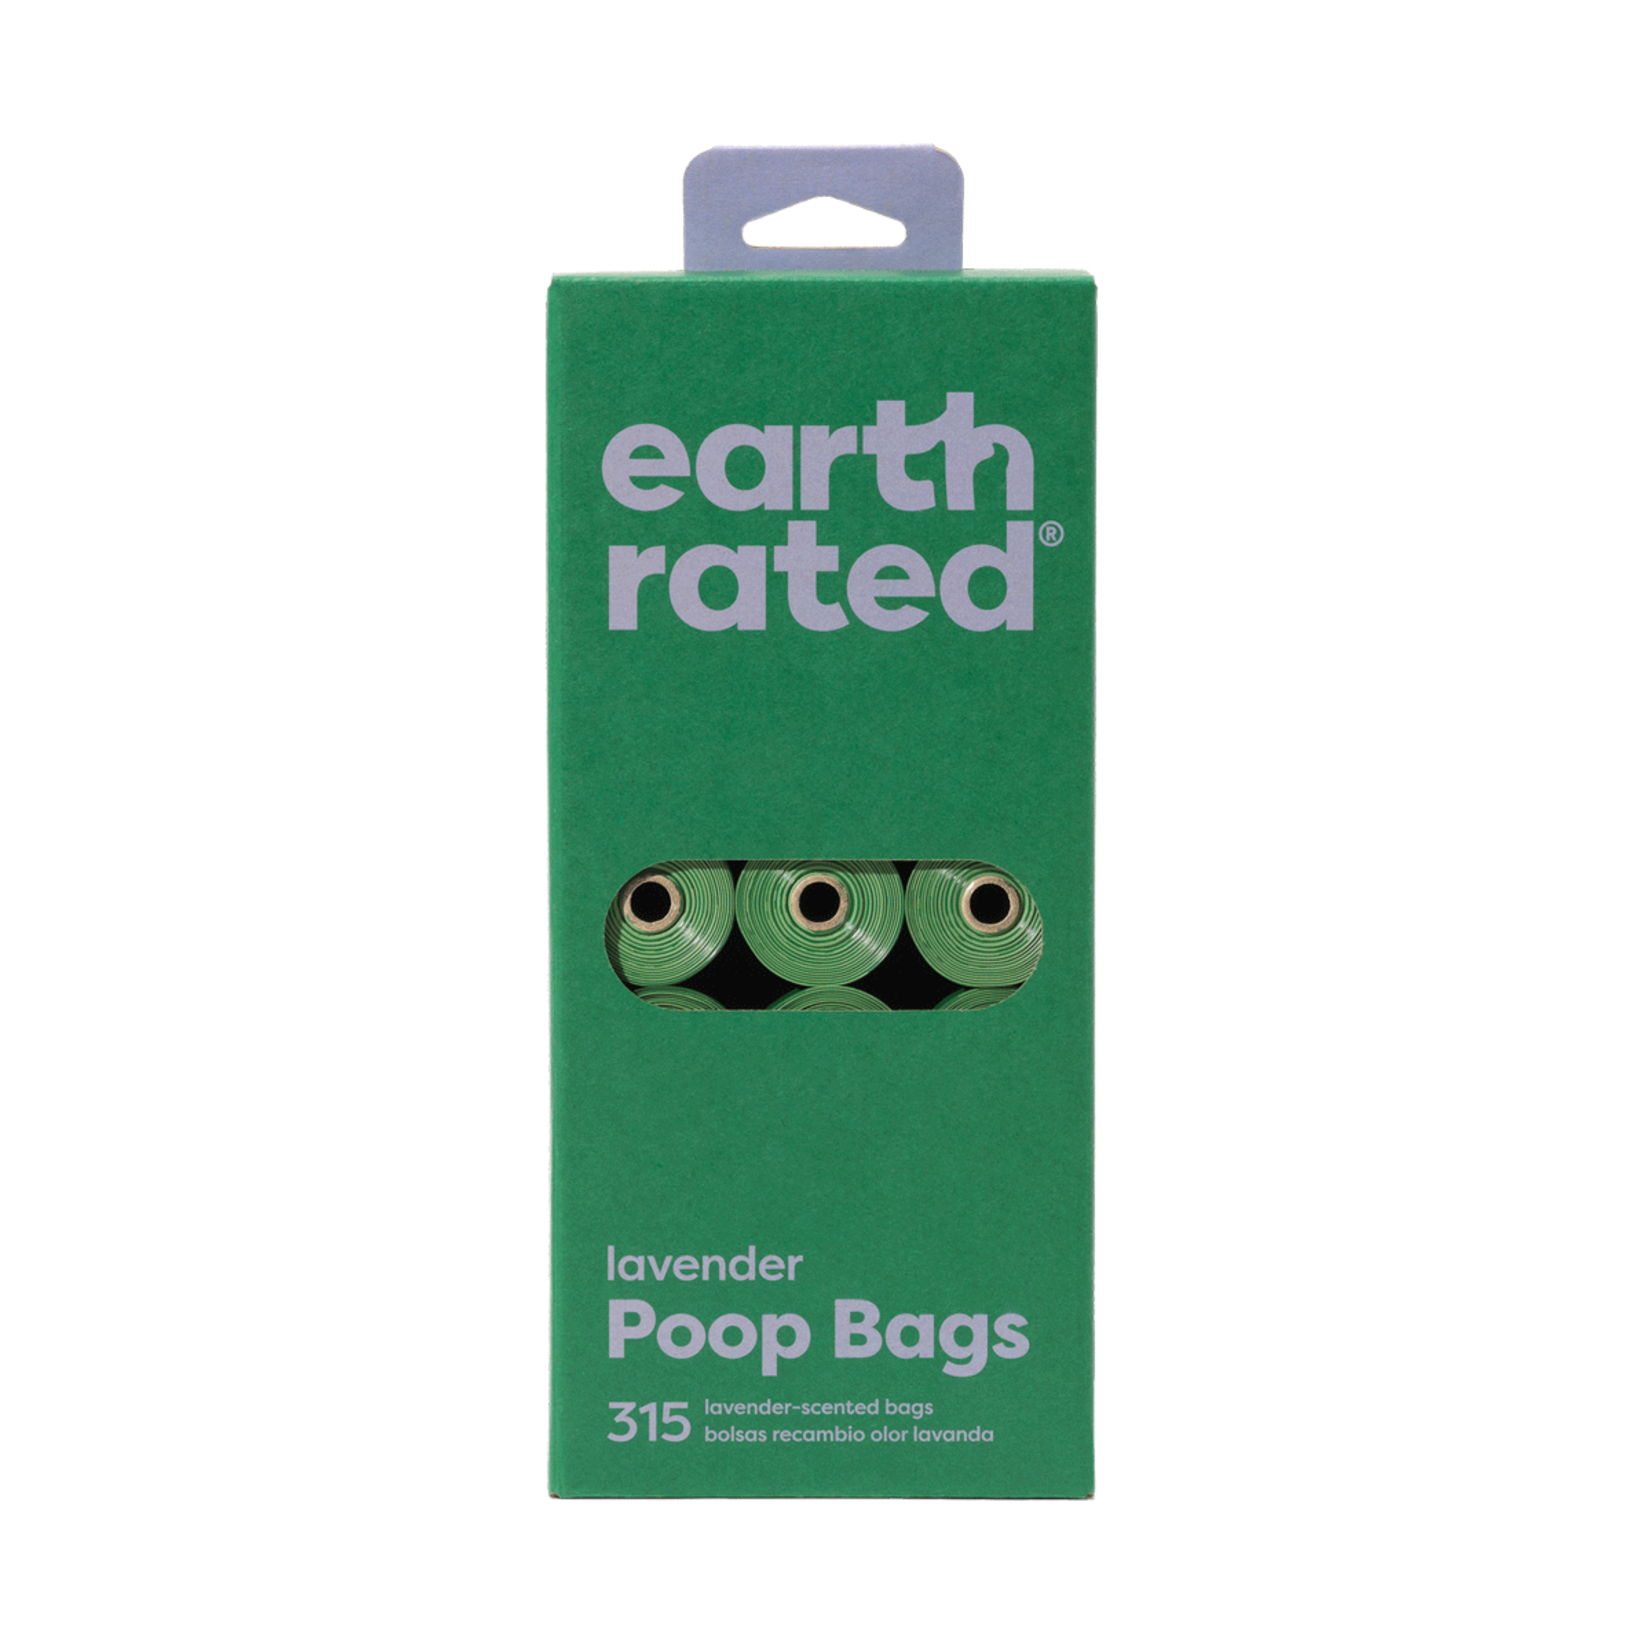 Earth Rated Earth Rated Poop Bags Bulk 315ct 21pk Unscented and Lavender